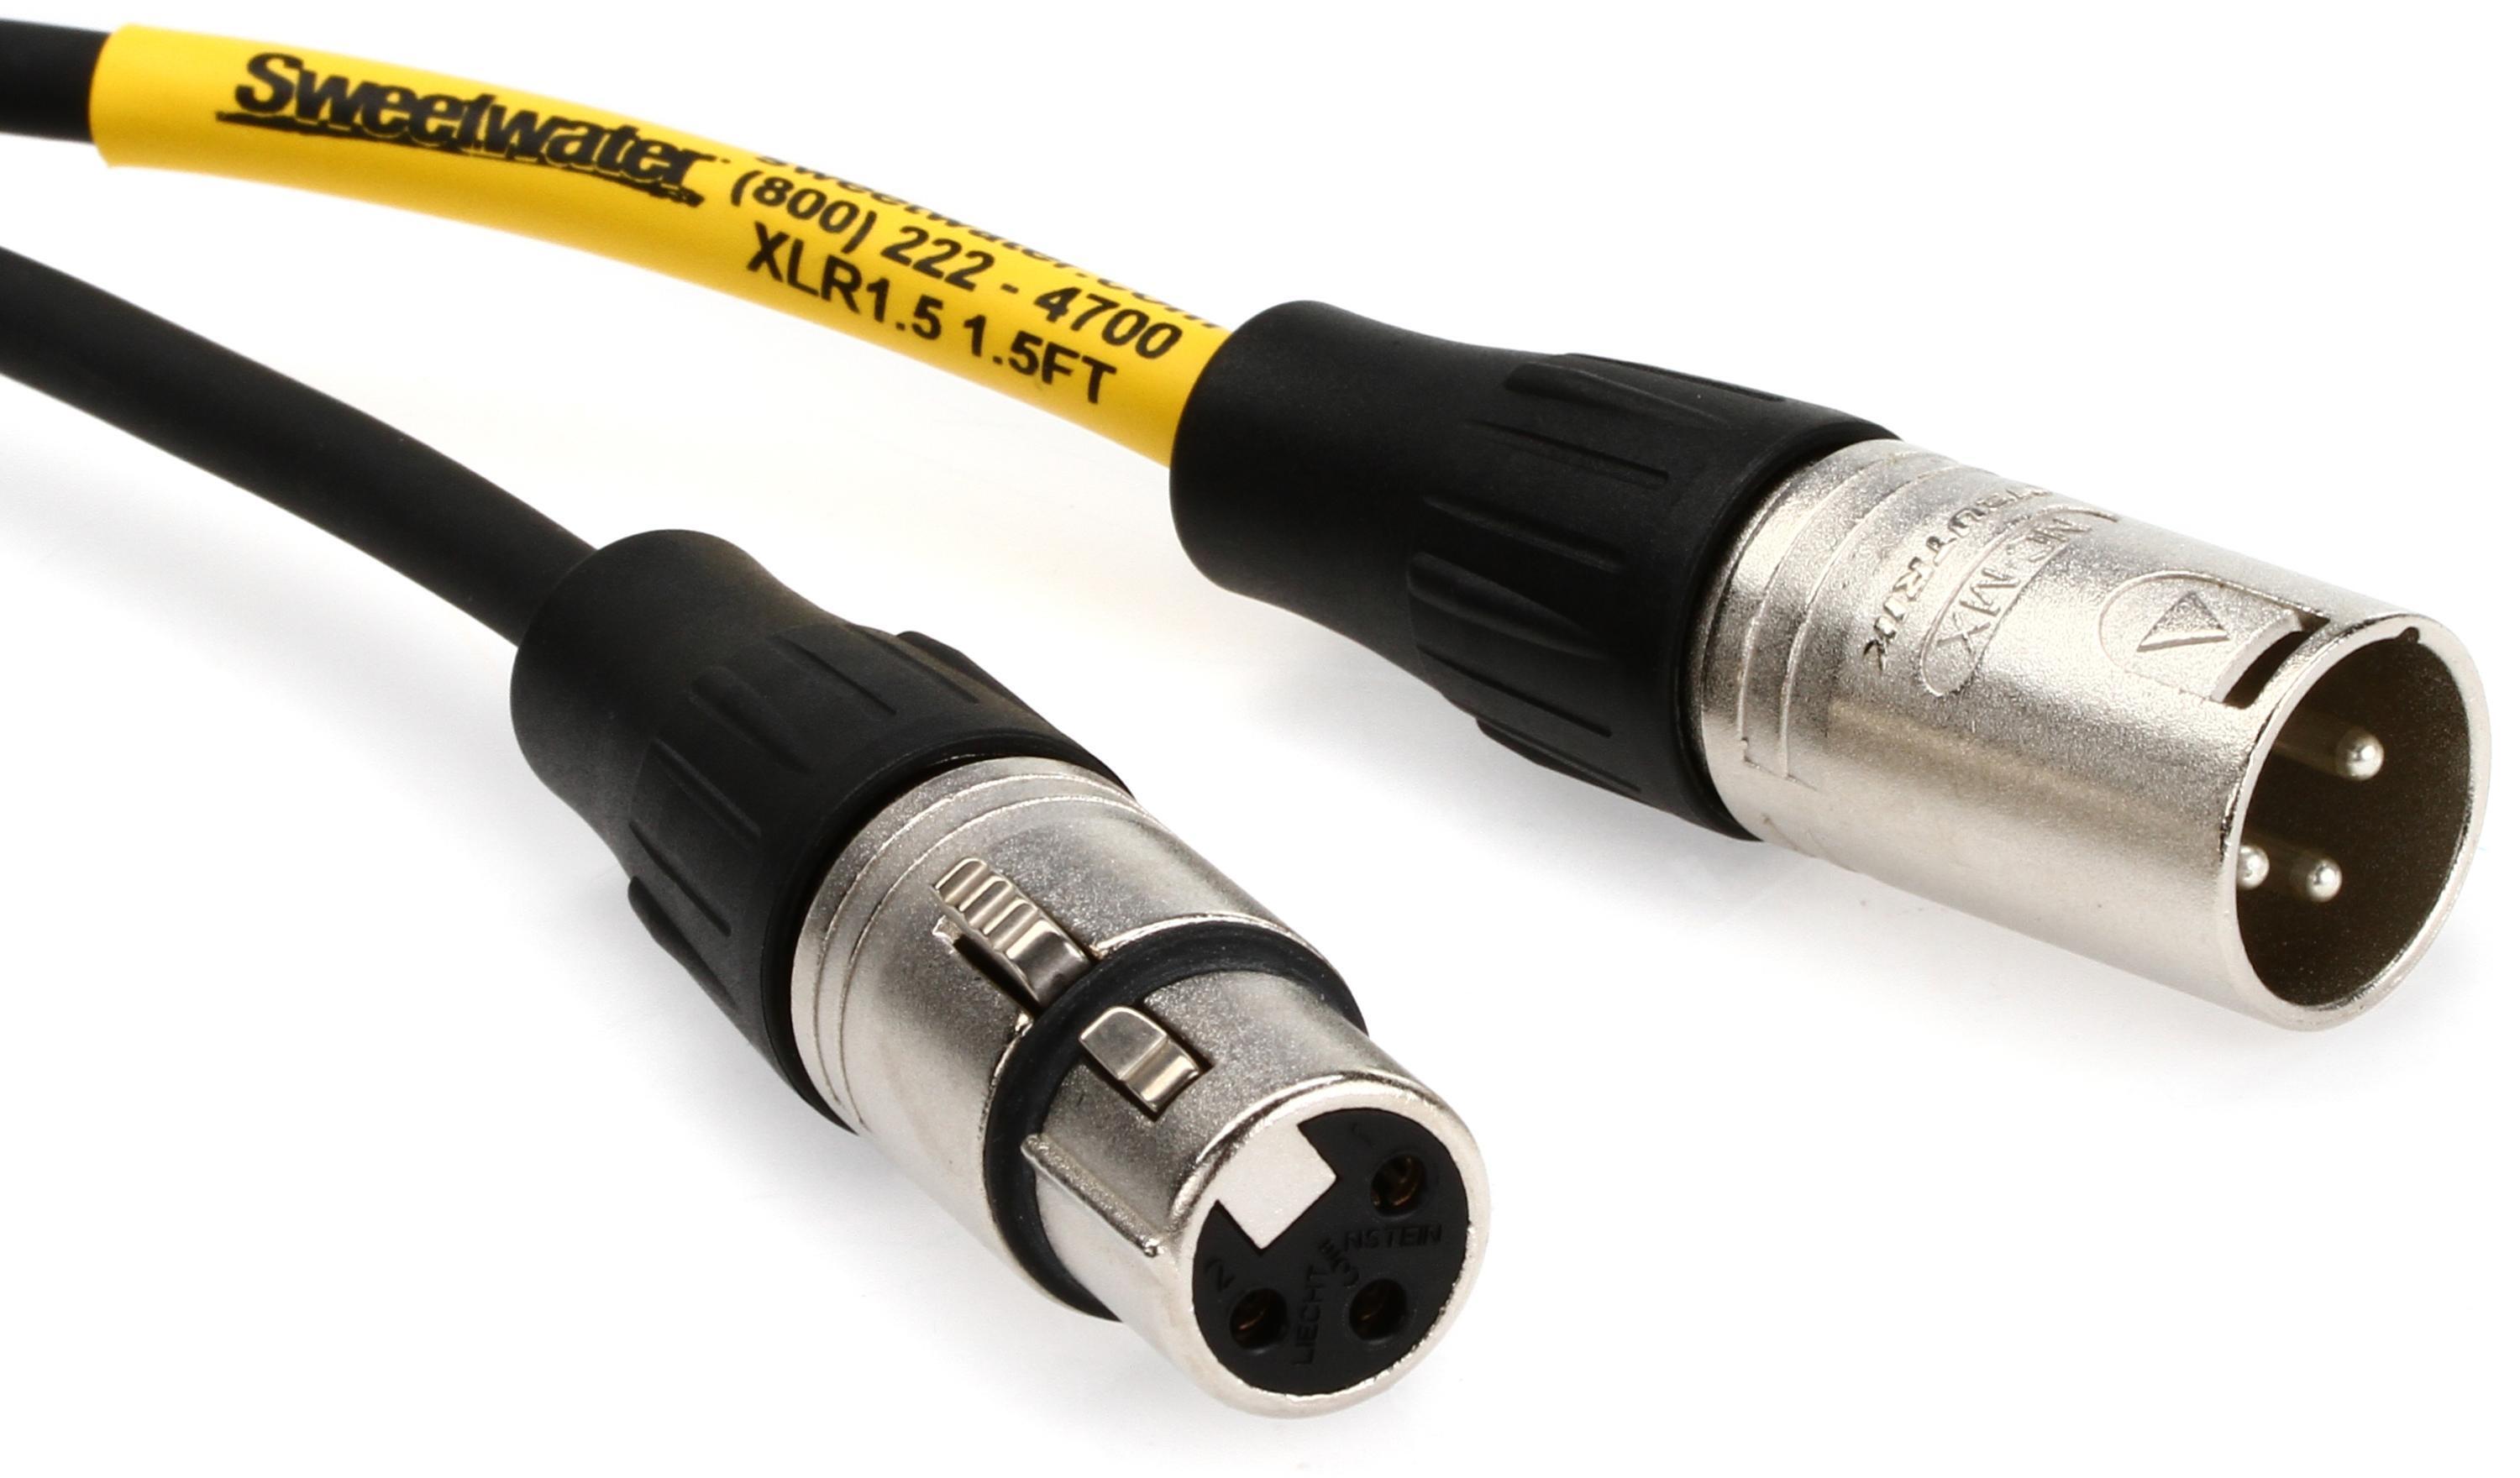 Balanced Cables: XLR to XLR - Sweetwater